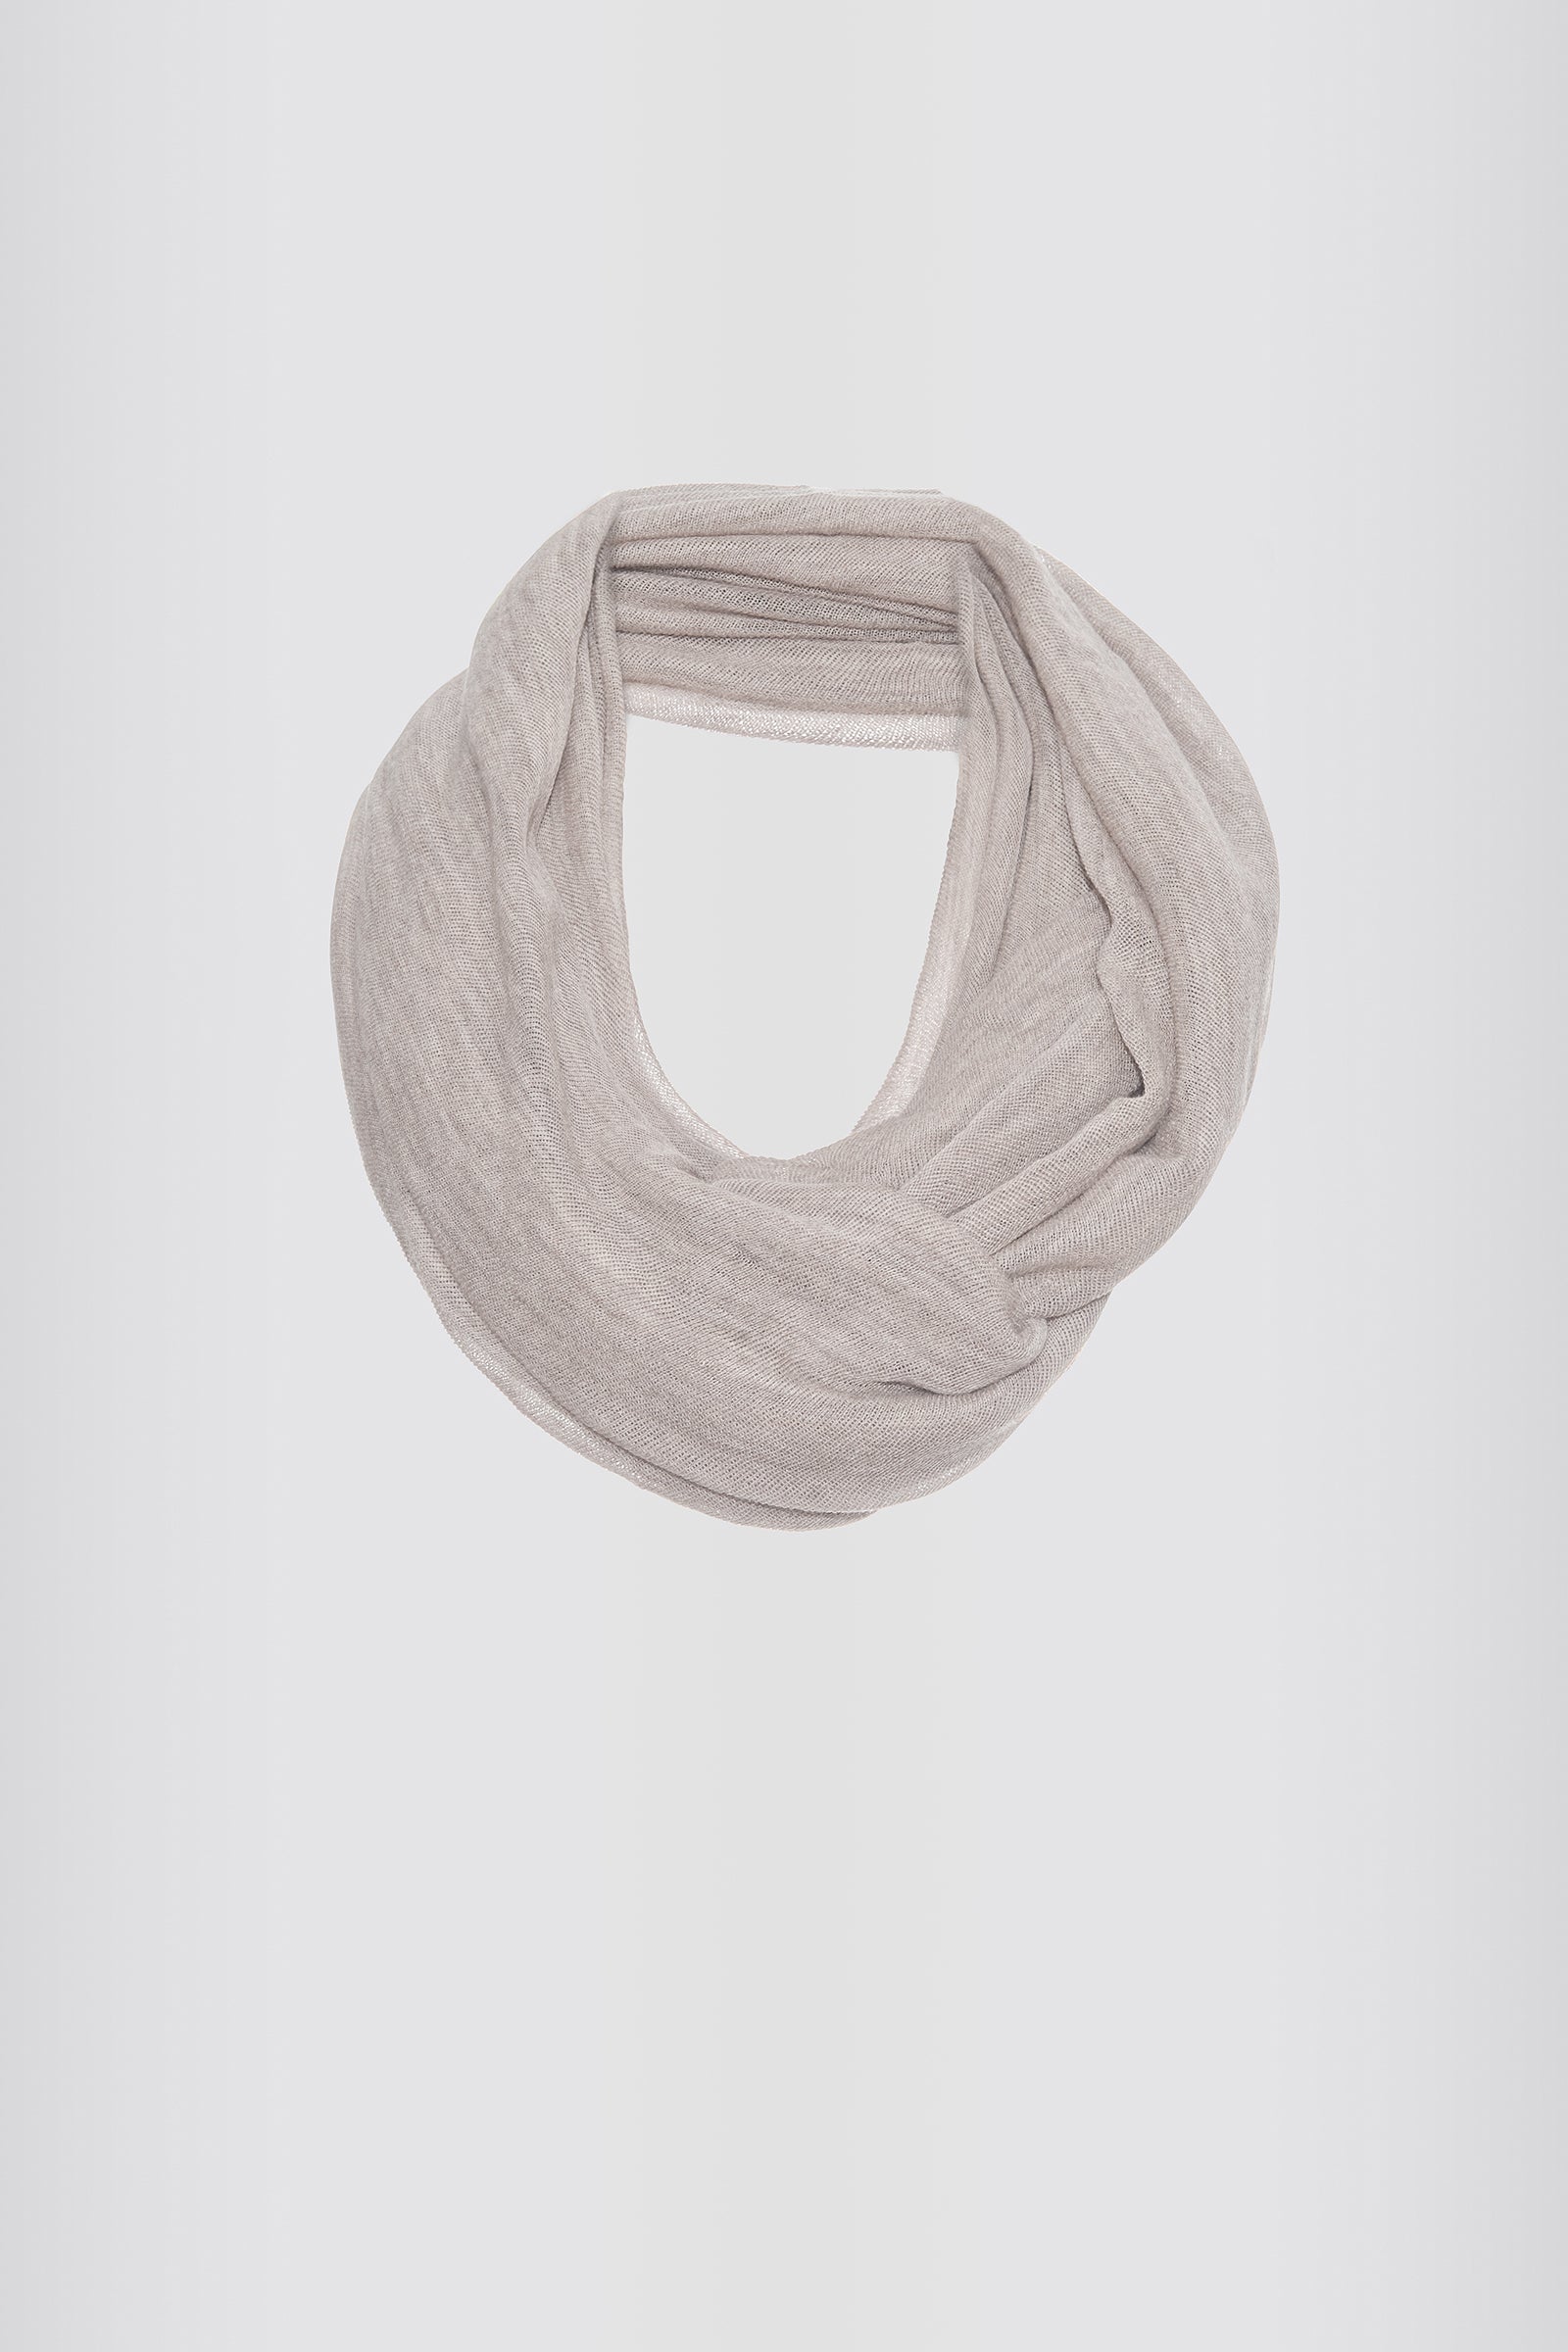 Kal Rieman circle scarf in light beige on model front view